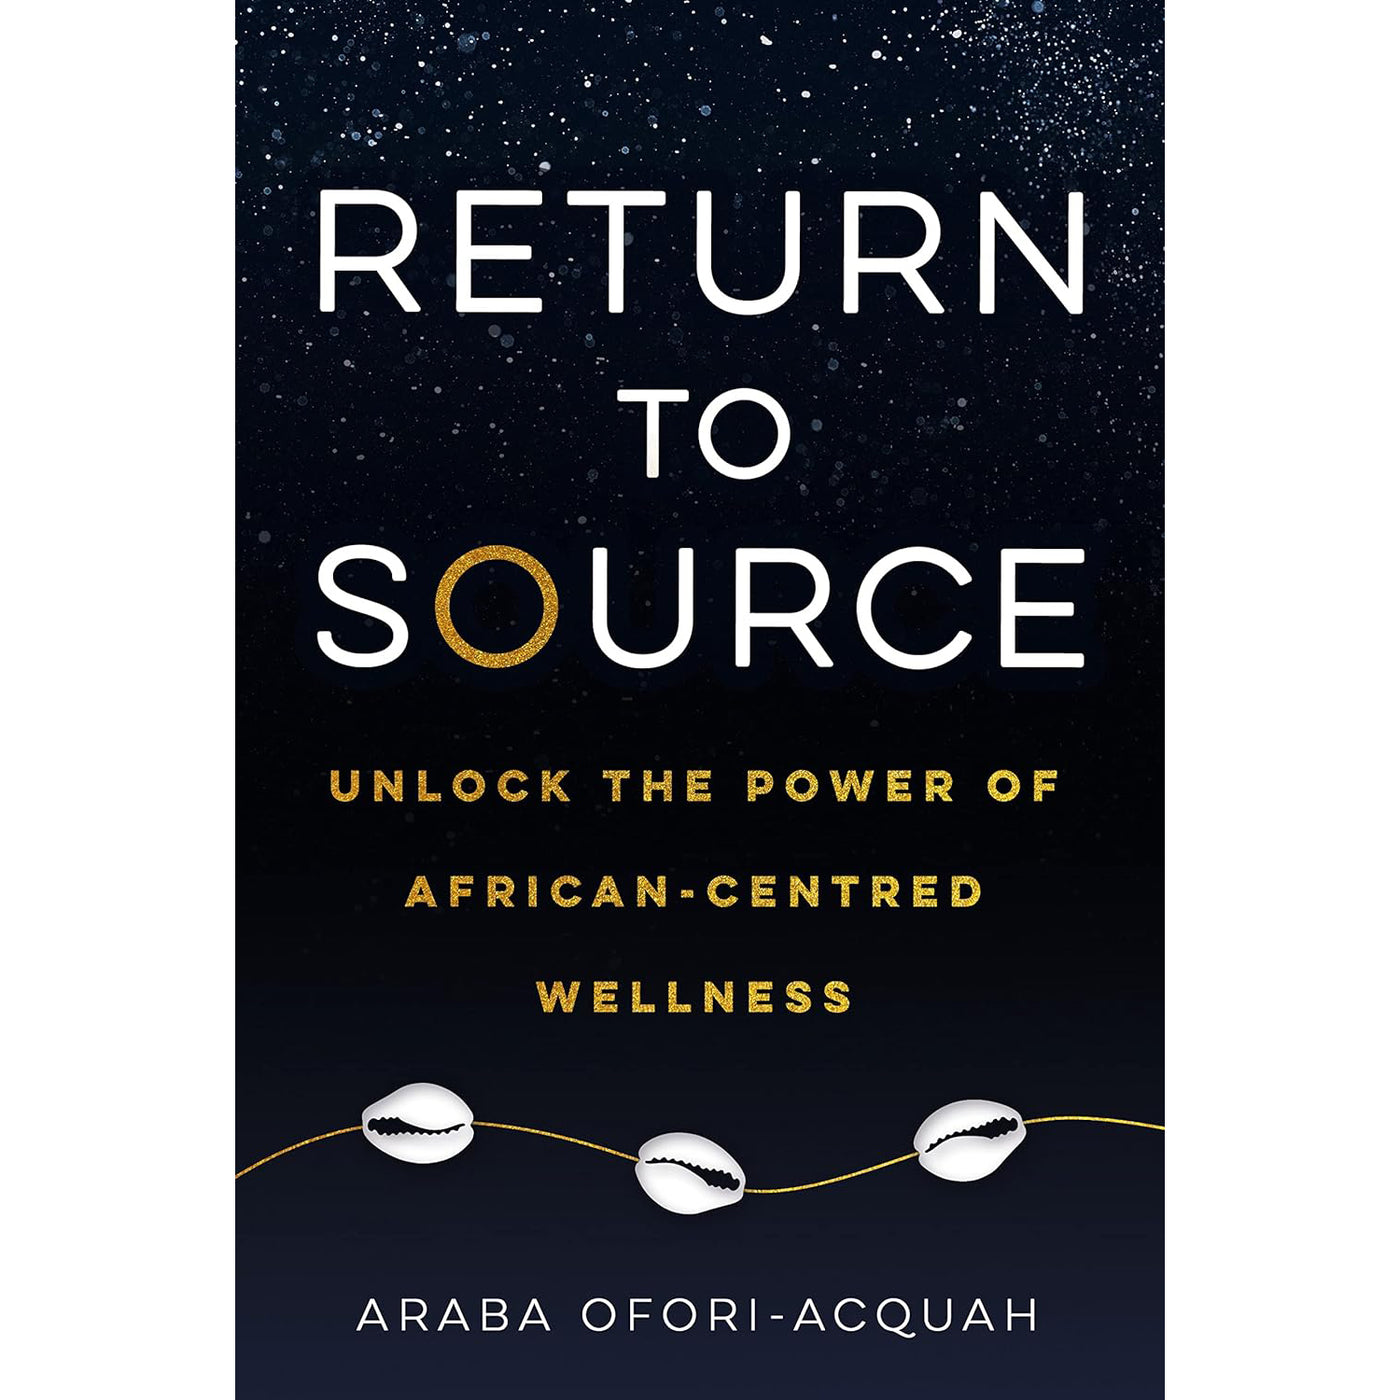 Return to Source: Unlock the Power of African-Centred Wellness